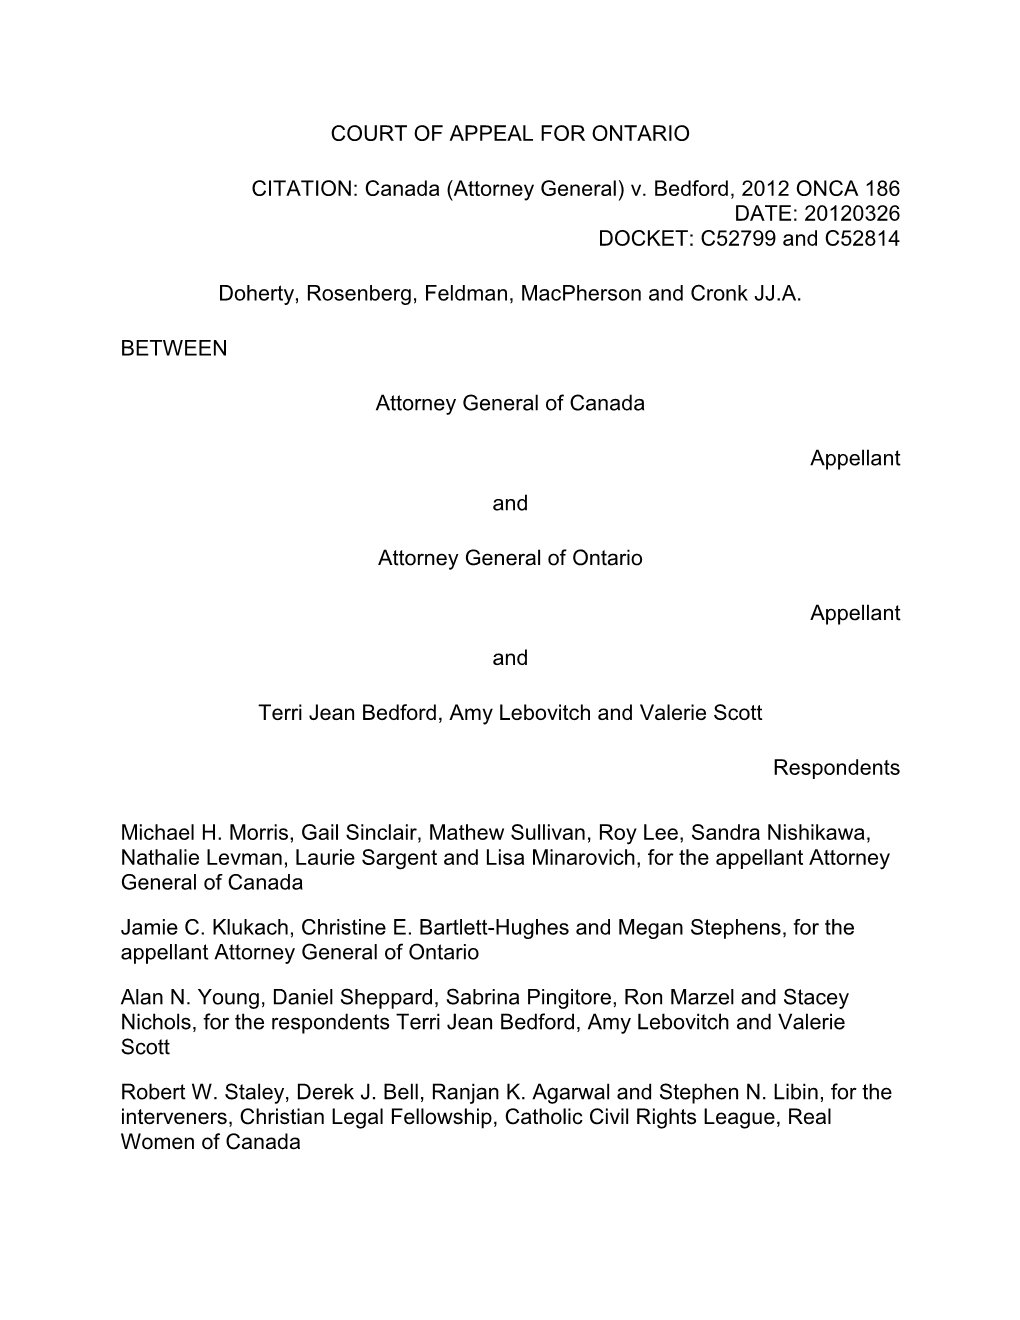 Canada (Attorney General) V. Bedford, 2012 ONCA 186 DATE: 20120326 DOCKET: C52799 and C52814